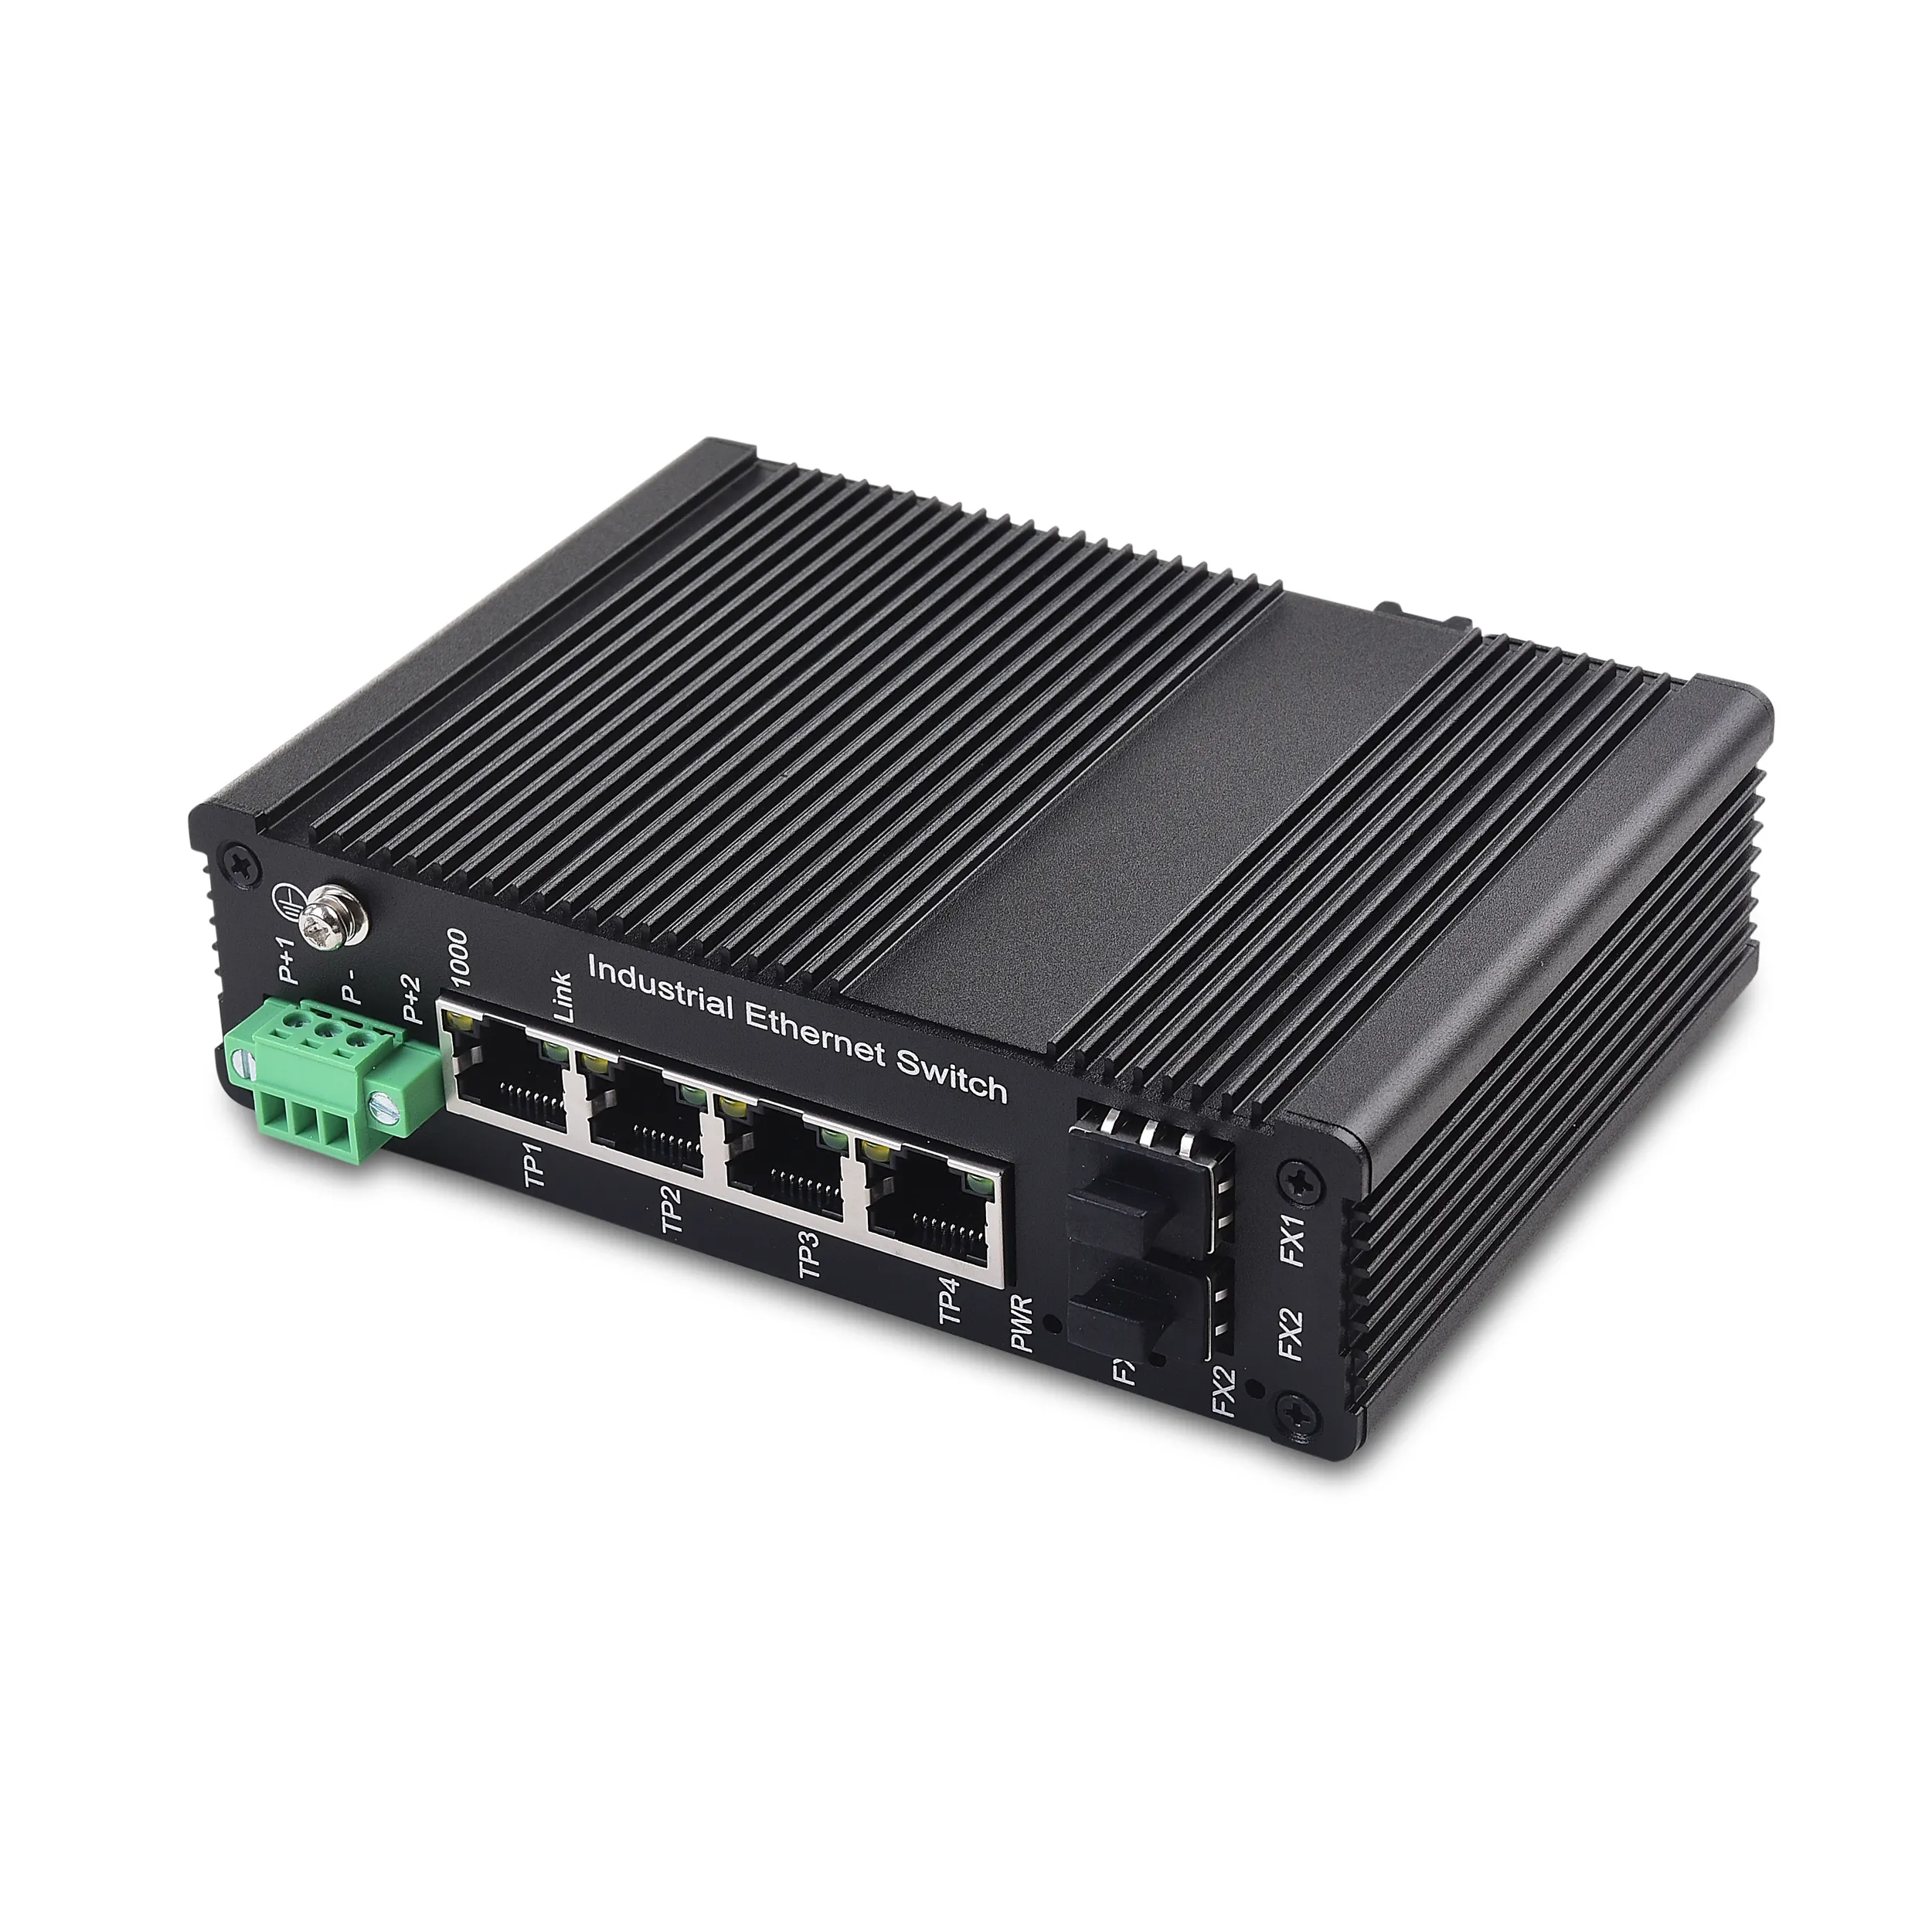 manufacturers 2 SFP port with small unmanaged industrial 4 port 1000 mbps ethernet lever fan switch